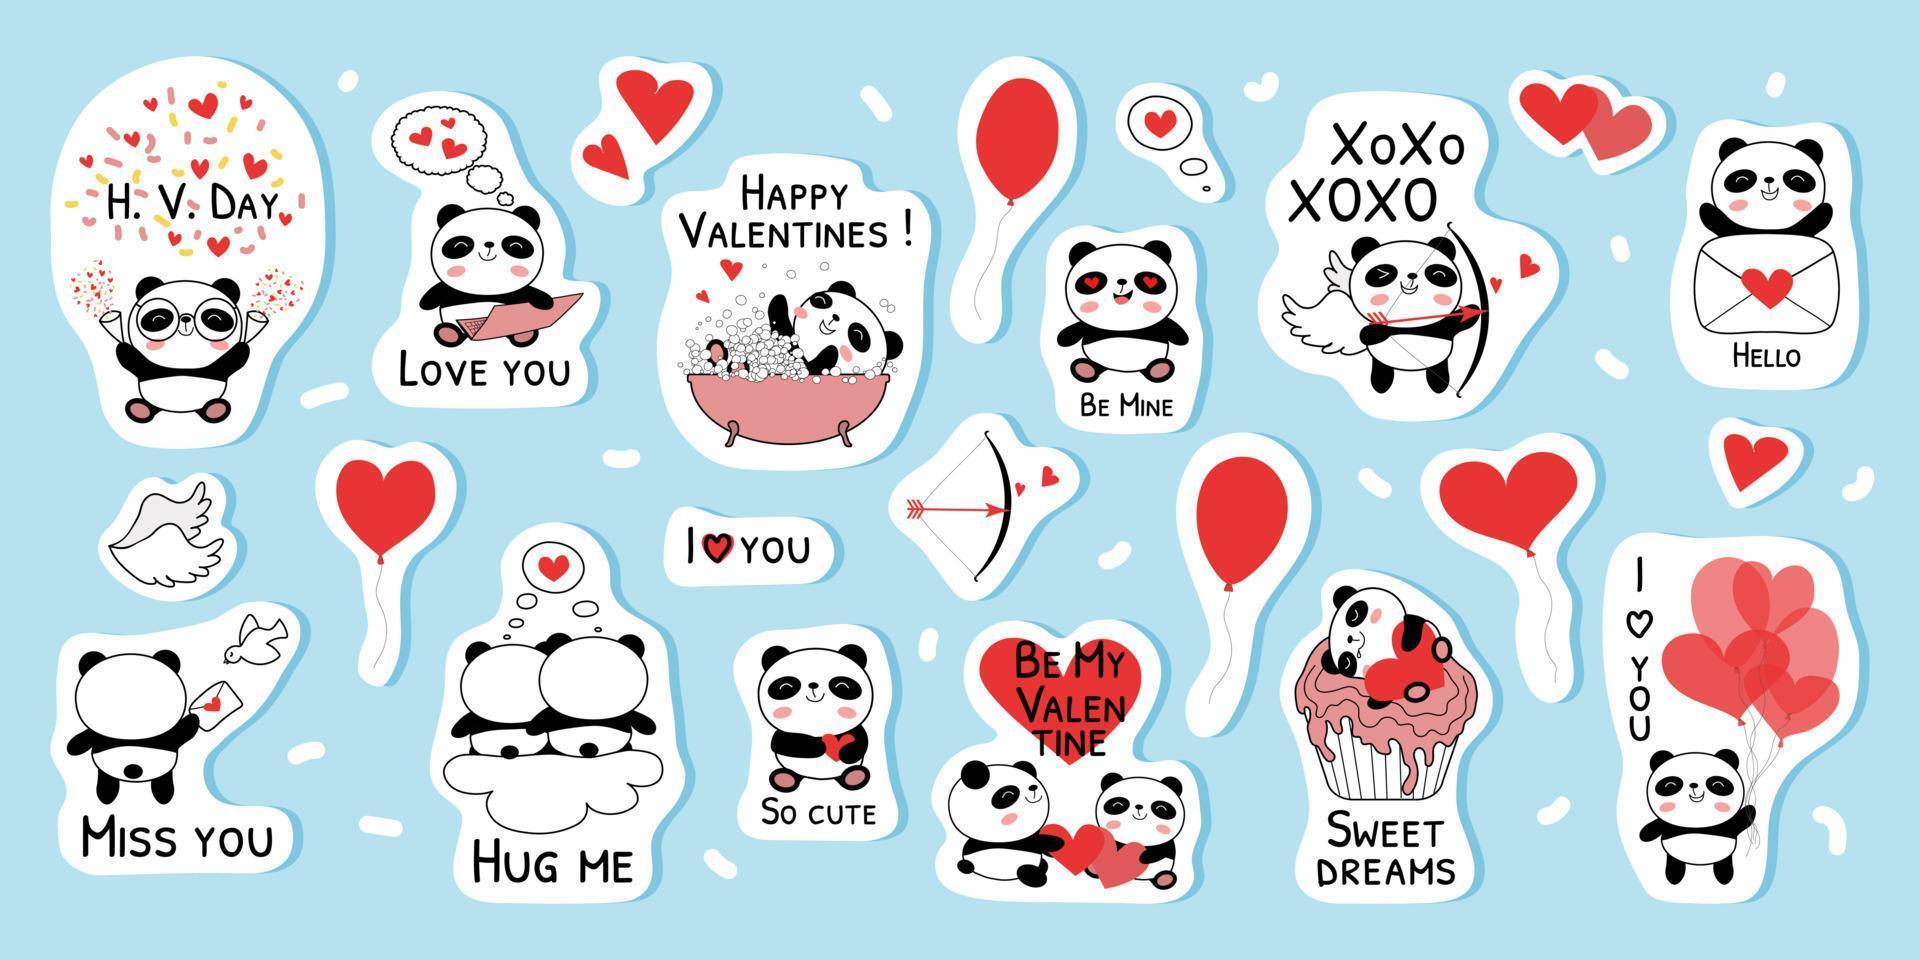 Baby panda stickers for valentines day vector illustration